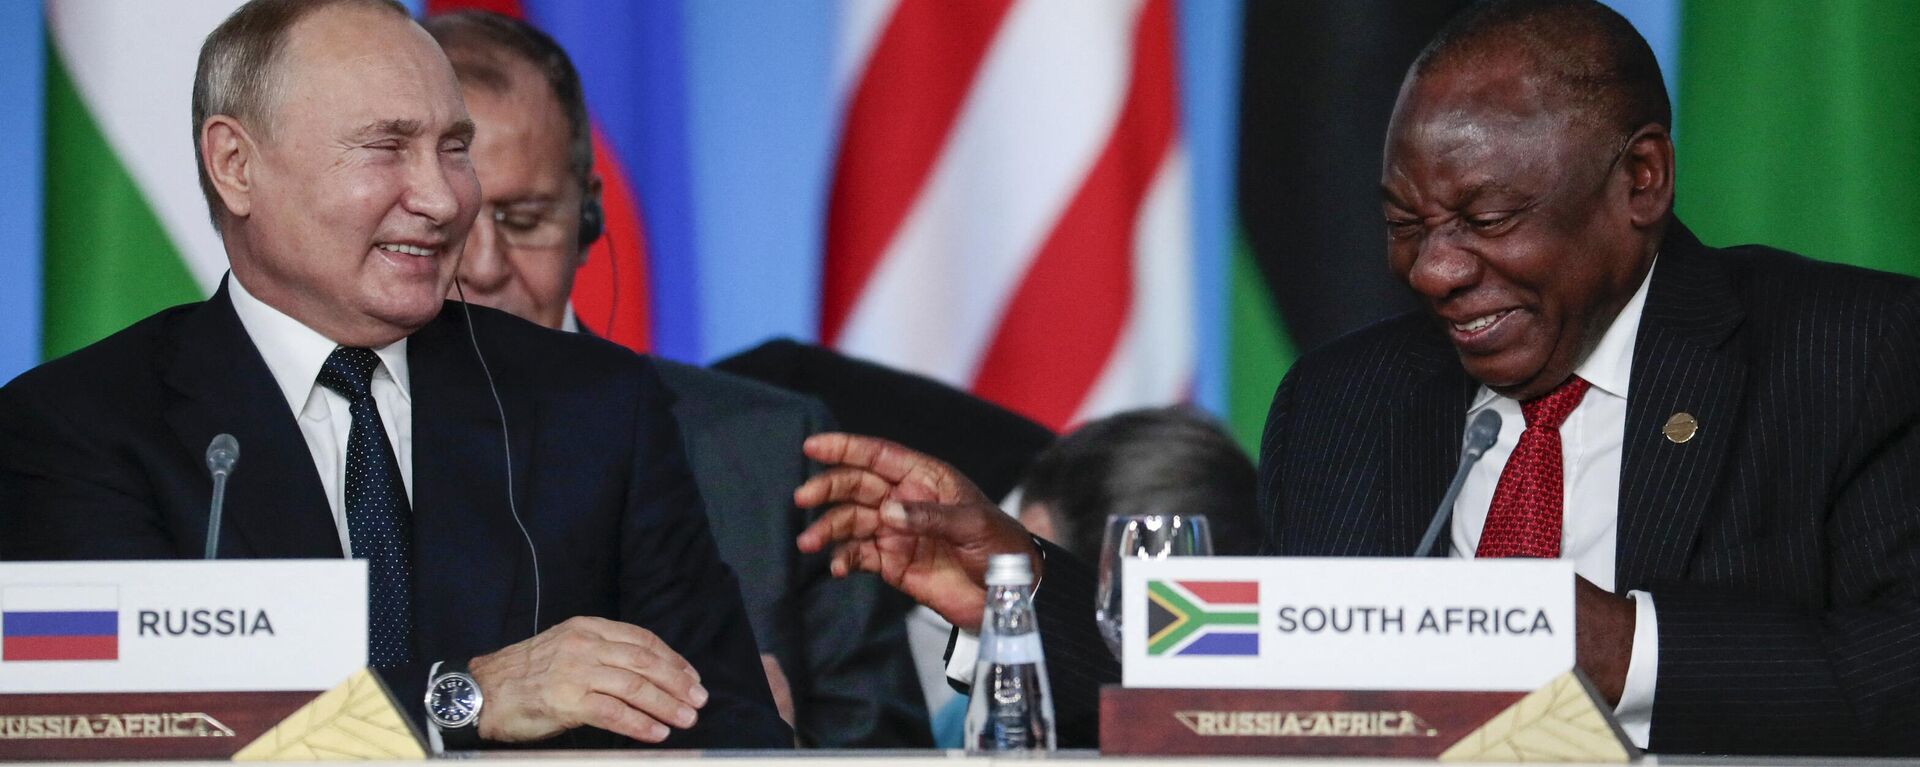 South-Africa's President Cyril Ramaphosa (L) and Russia's President Vladimir Putin (R) attend the first plenary session as part of the 2019 Russia-Africa Summit at the Sirius Park of Science and Art in Sochi, Russia, on October 24, 2019 - Sputnik International, 1920, 08.04.2023